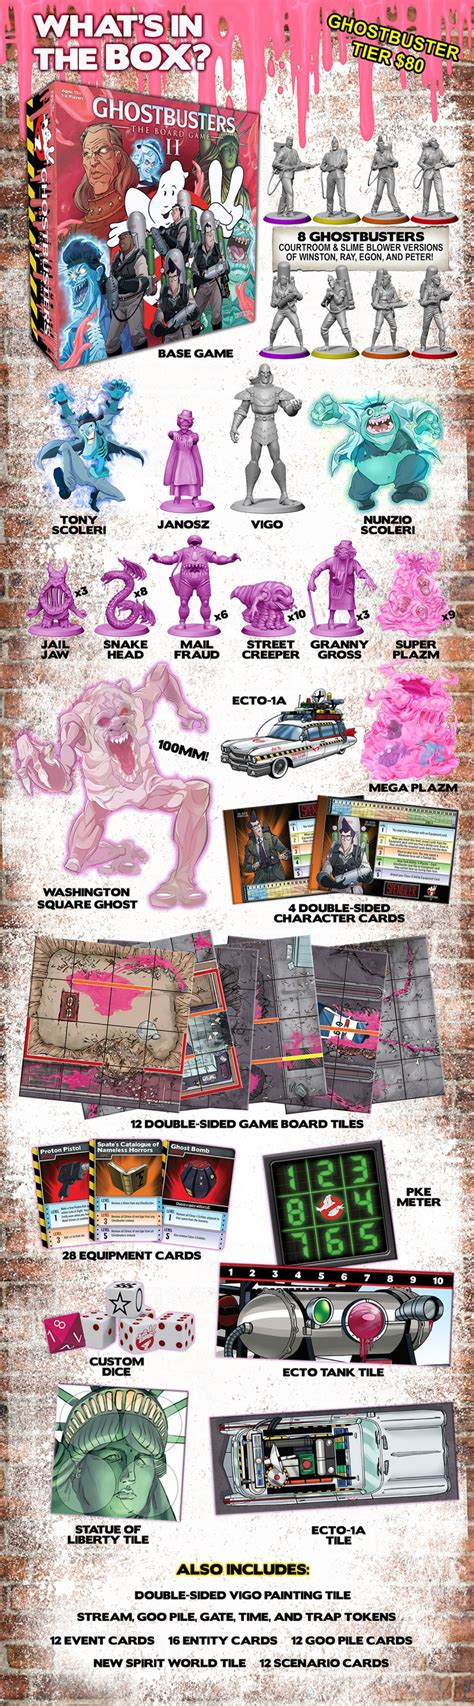 Ghostbusters The Board Game Ii Now On Kickstarter Dice Tower News